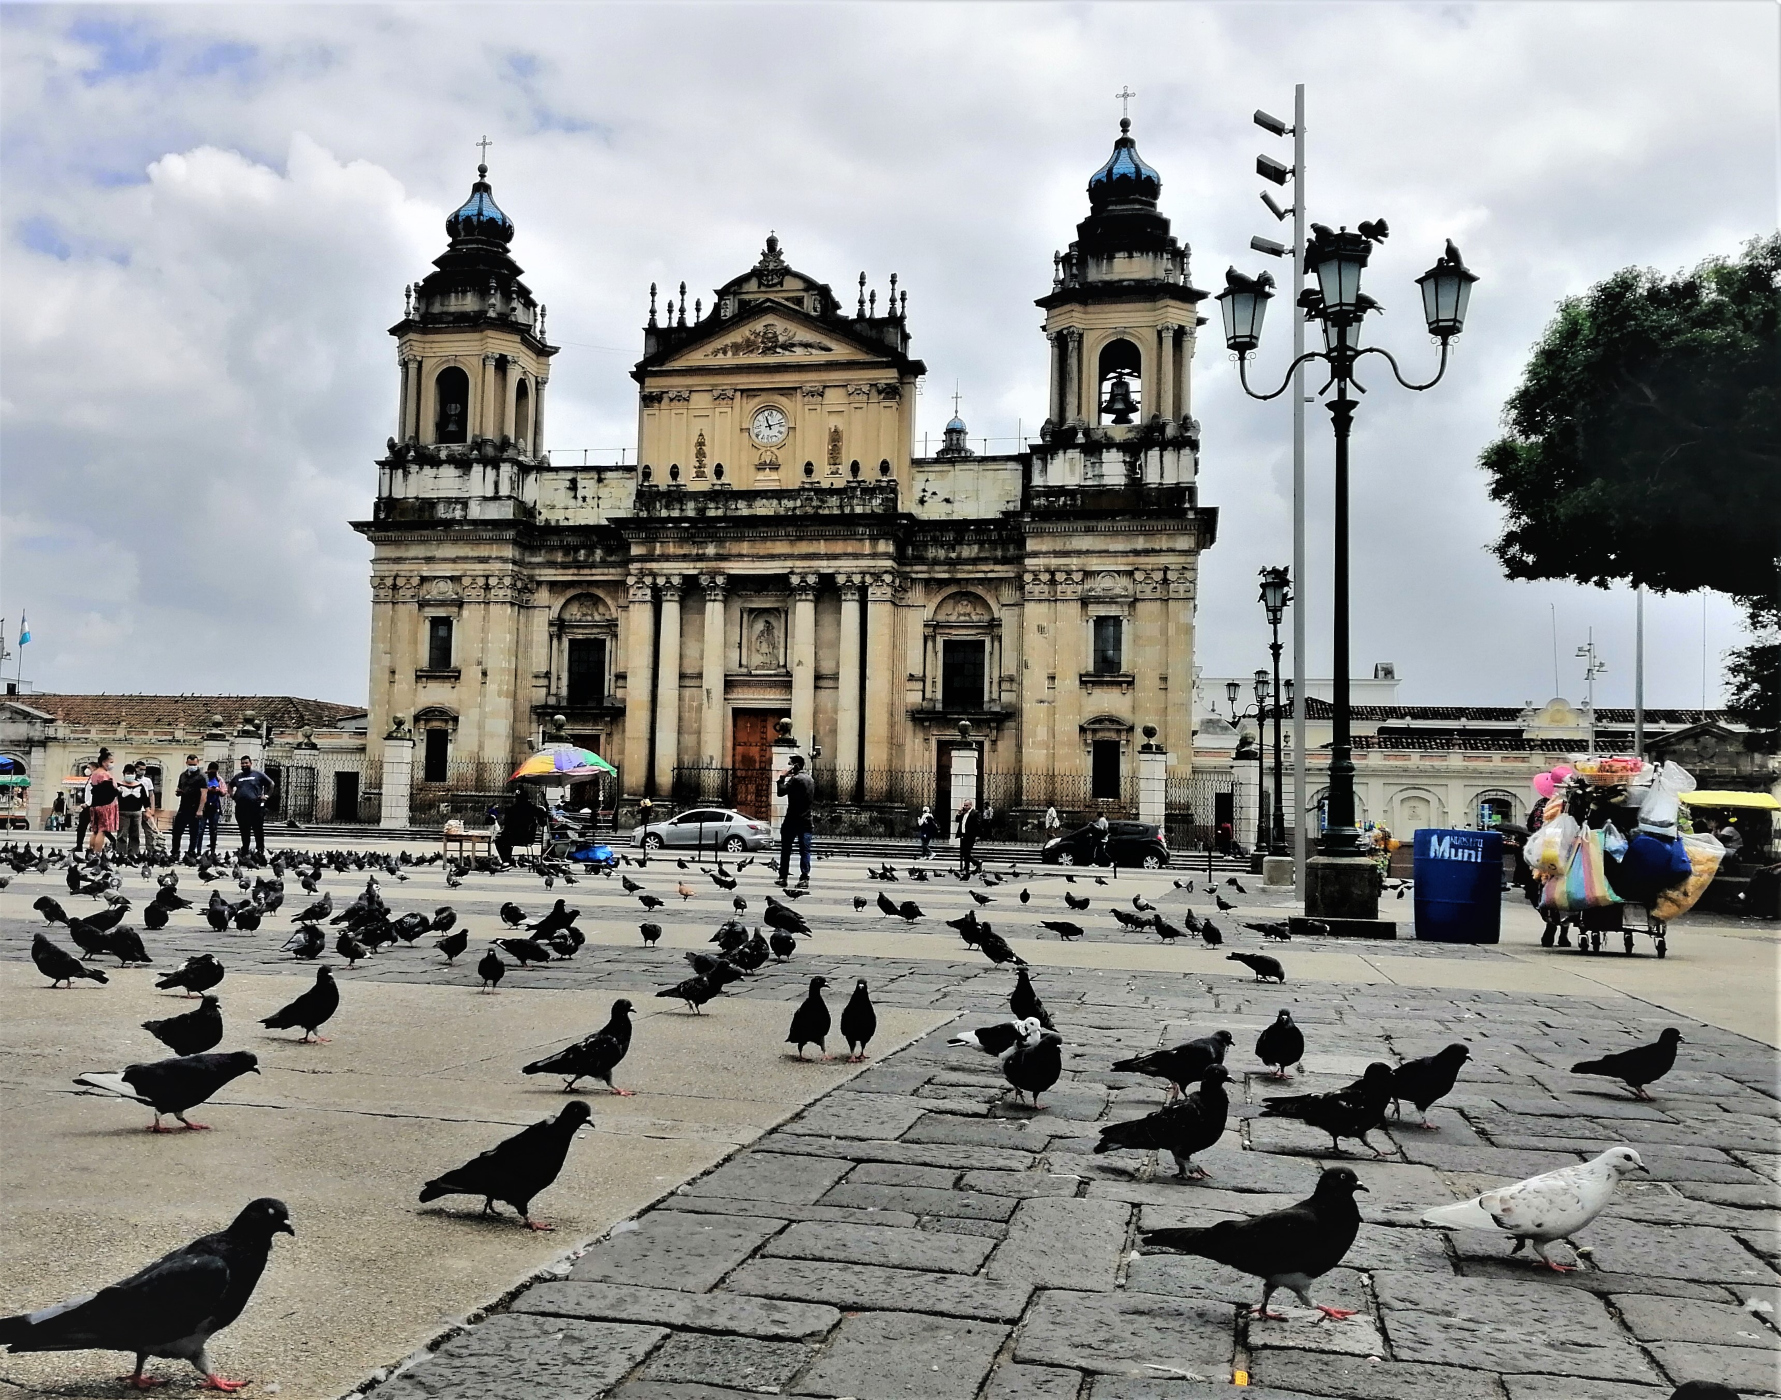 The cathedral and birds at the Parque Central or Central Park, Guatemala City, Guatemala.